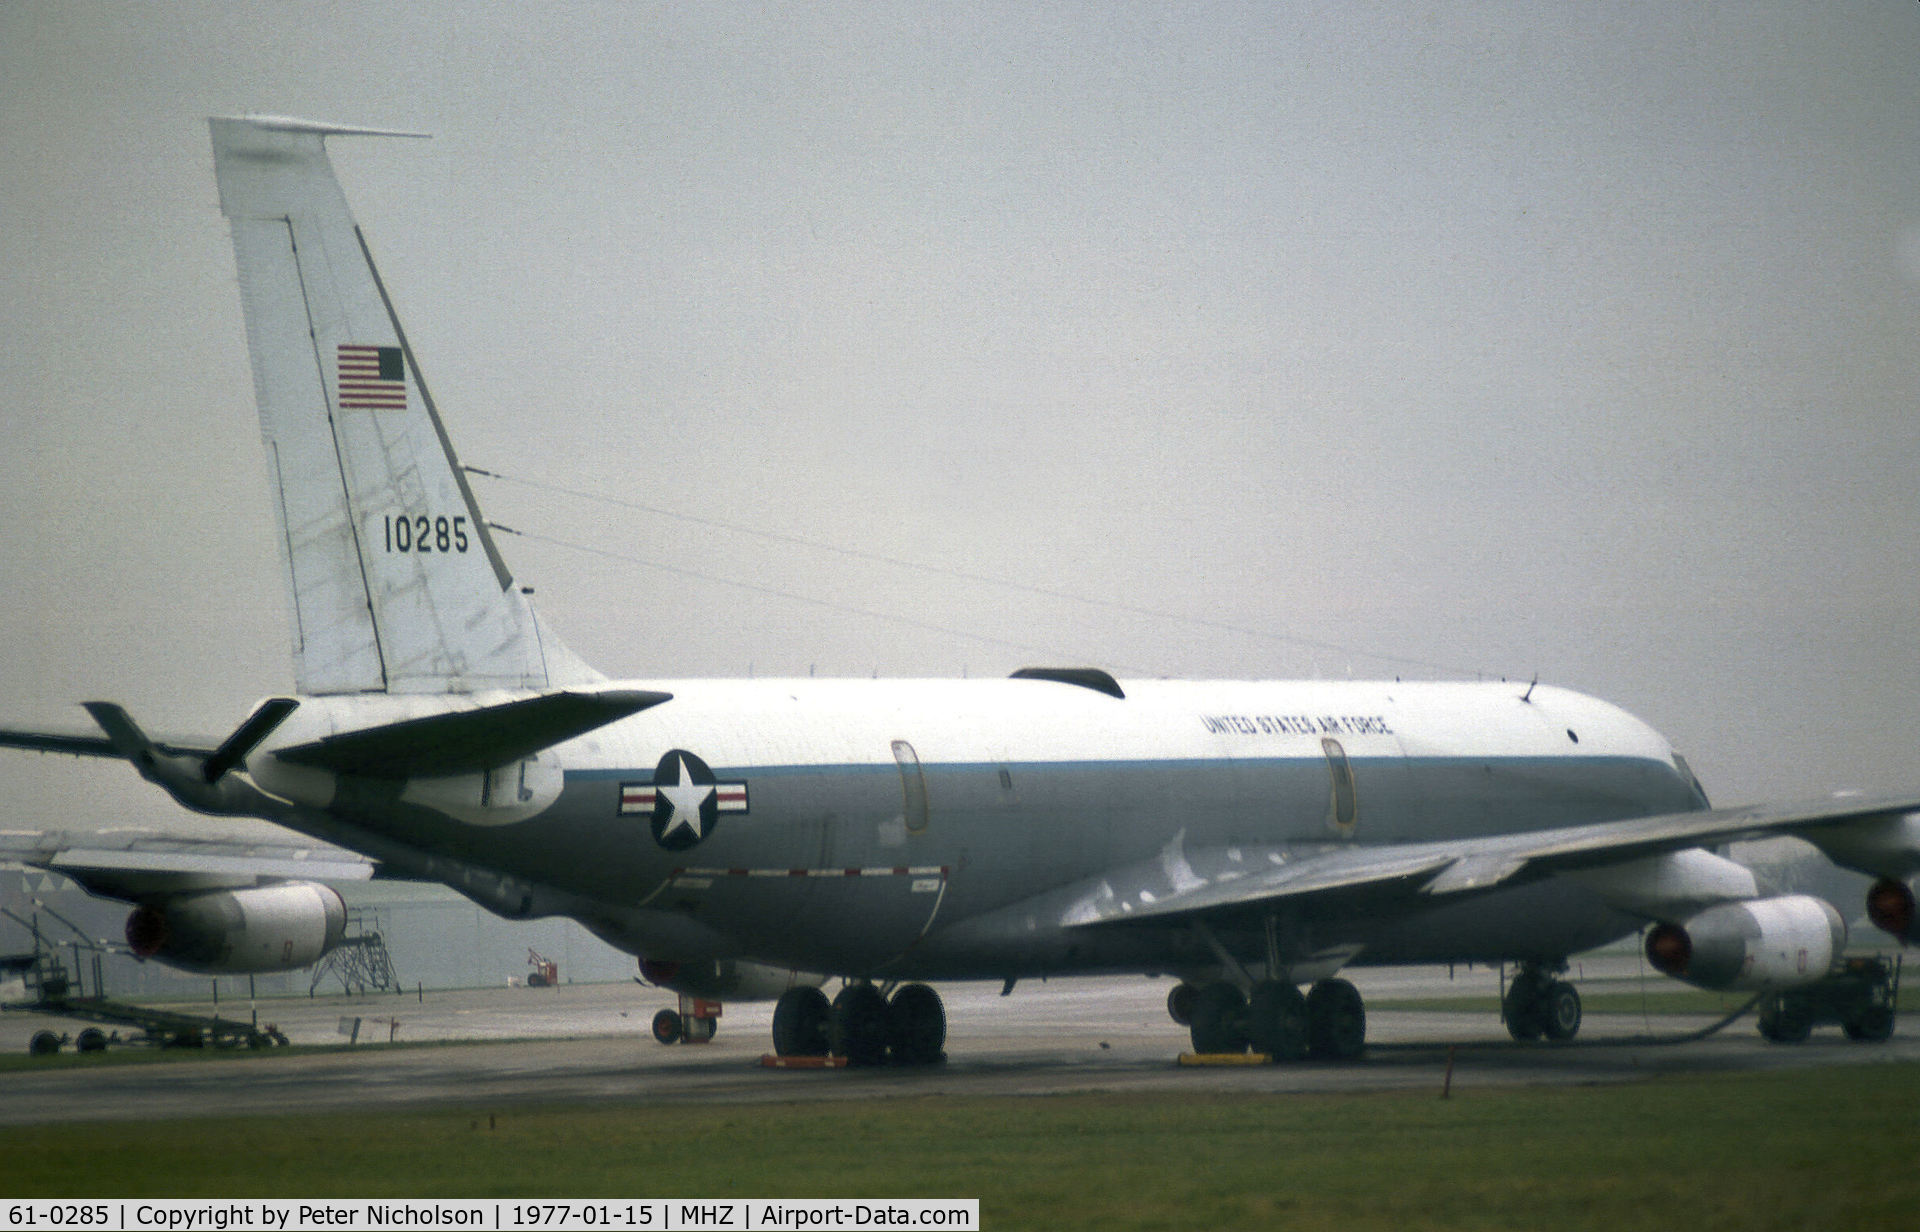 61-0285, 1961 Boeing EC-135H Stratotanker C/N 18192, EC-135H Silk Purse Command Post of 10th  Airborne Command and Control Squadron resident at RAF Mildenhall as seen in January 1977.